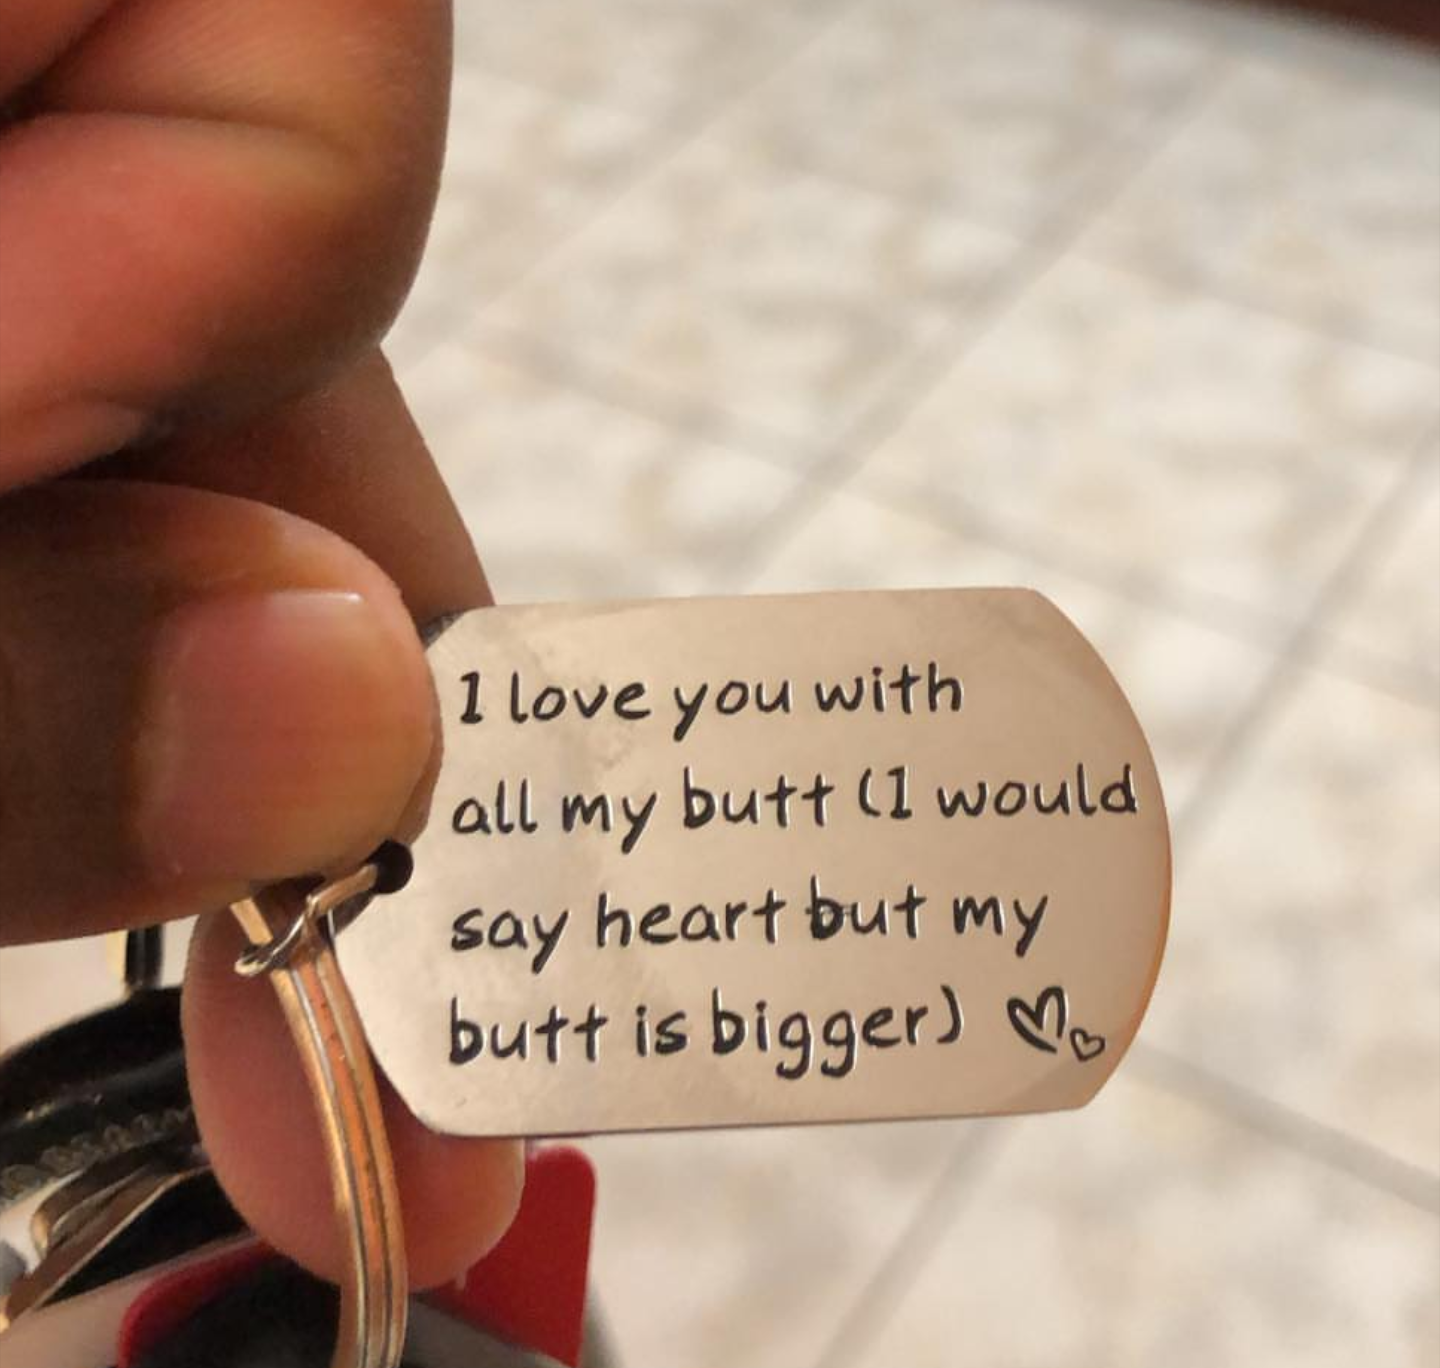 A gift from all ... the heart - Presents, Keychain, Heart, Humor, Love, Translation